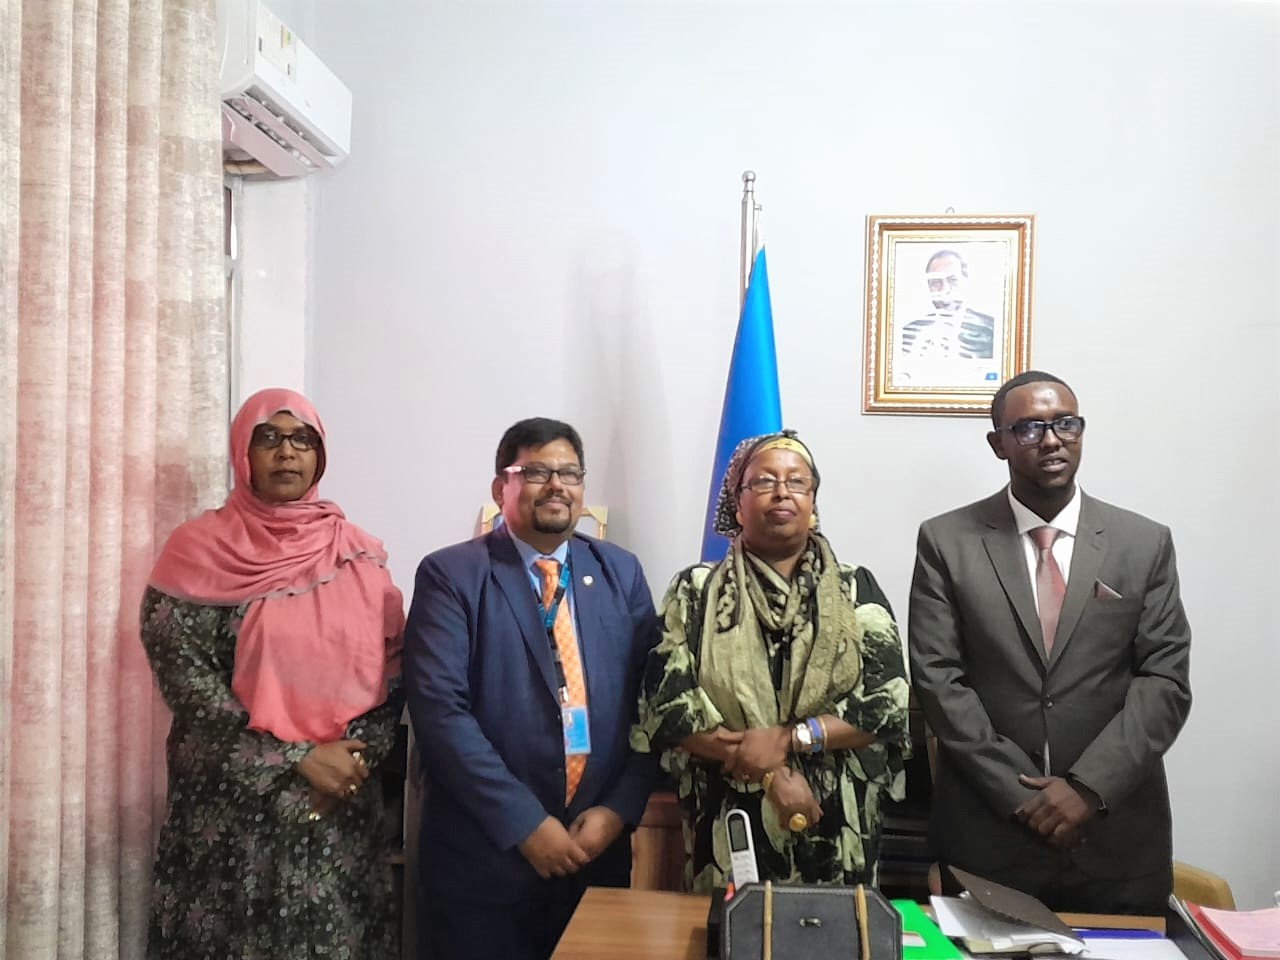 Assistant Minister Amina Hassan, UN Women Country Program Manager Dr.Syed Sadiq, Minister Women and Human Rights Development Somalia and Assistant Minister Abdihakim Jimlale Aden